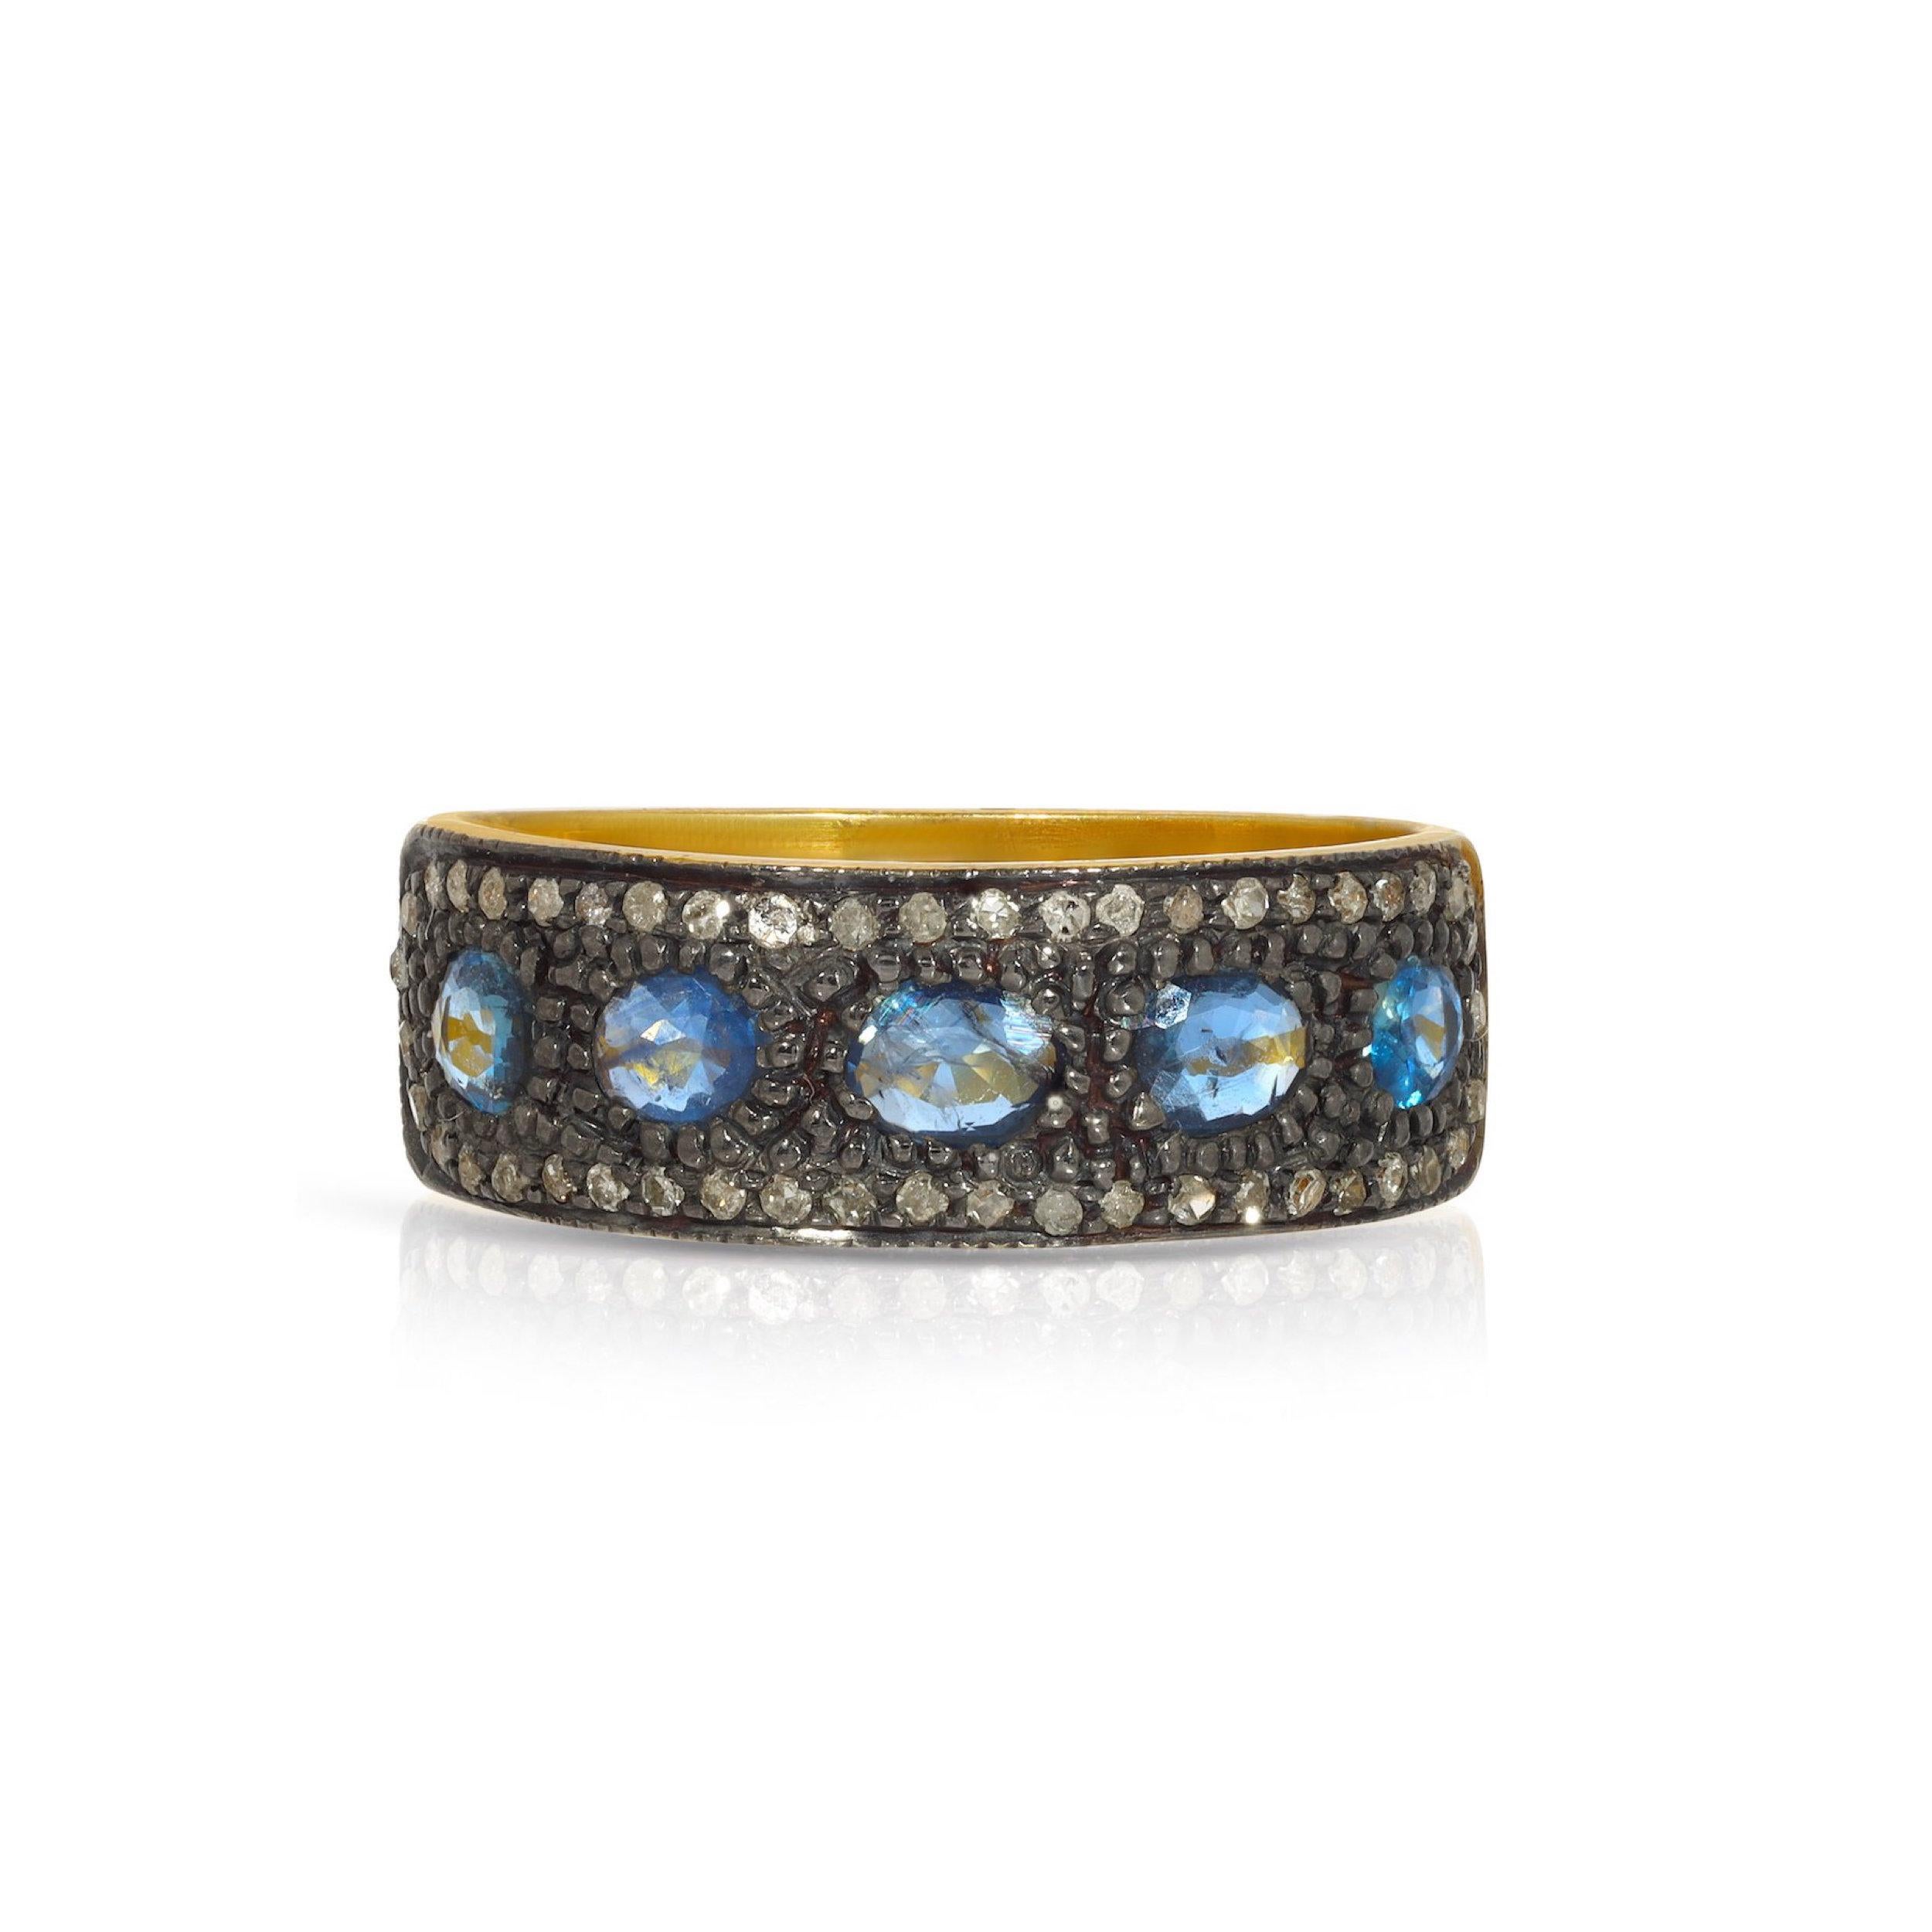 A beautiful Jaipur Mogul style band with a mix of gemstones and metals. This gorgeous ring features 1.65 Carats of stunning purple-blue Sapphires demi set in Blackened Oxidized Silver accented with .35 Carats of sparkling White Diamonds on a 22